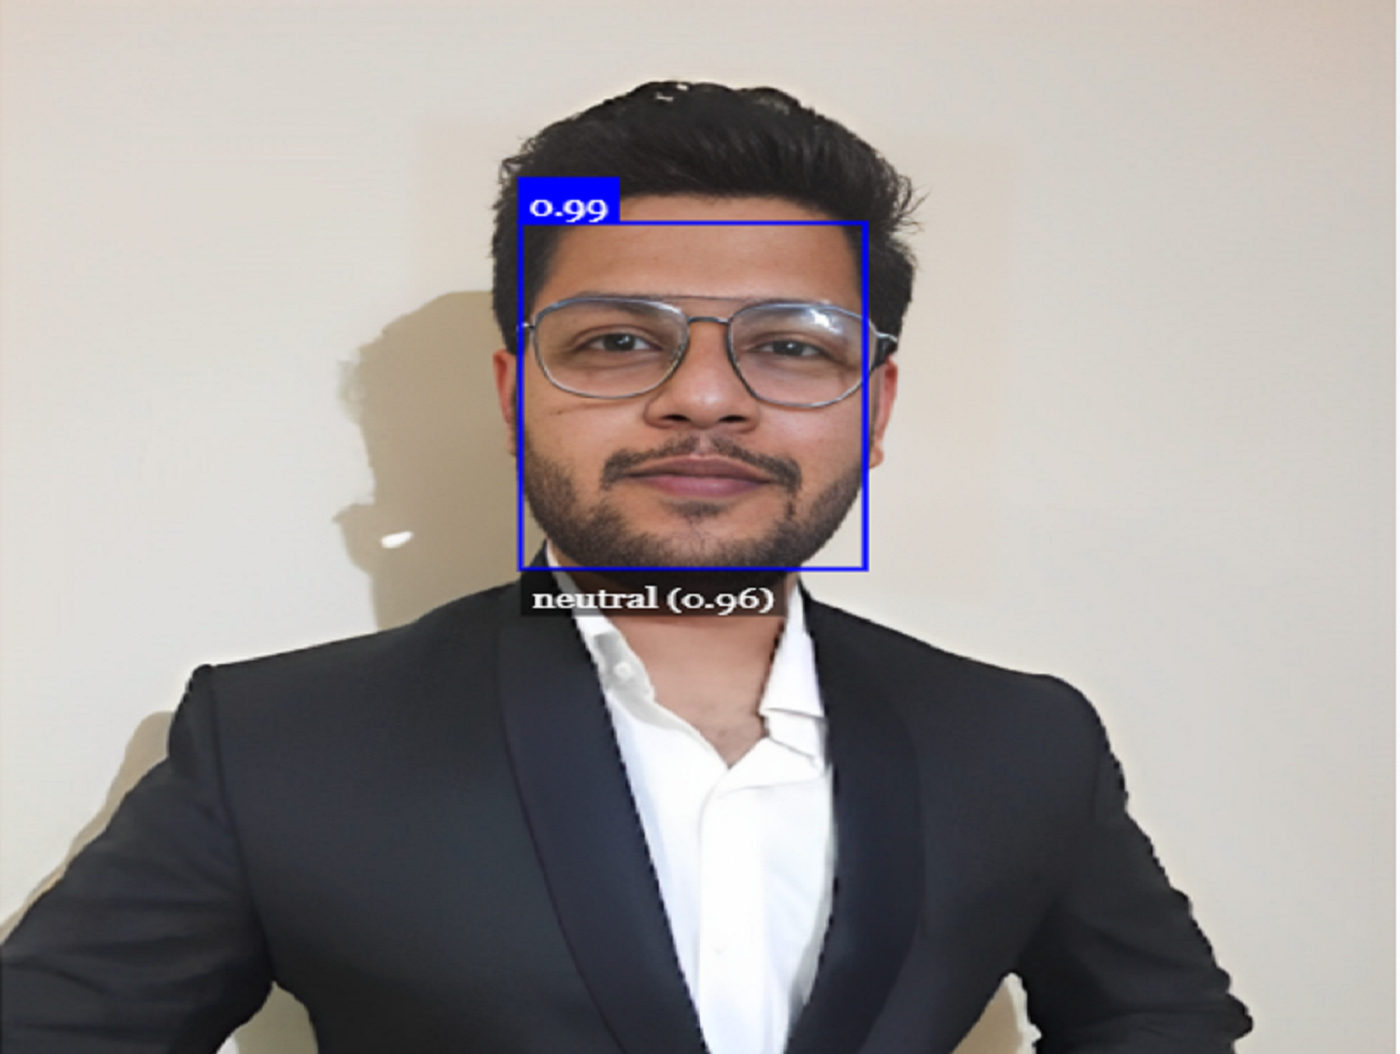 Detect face and emotion recognition using face-api.js